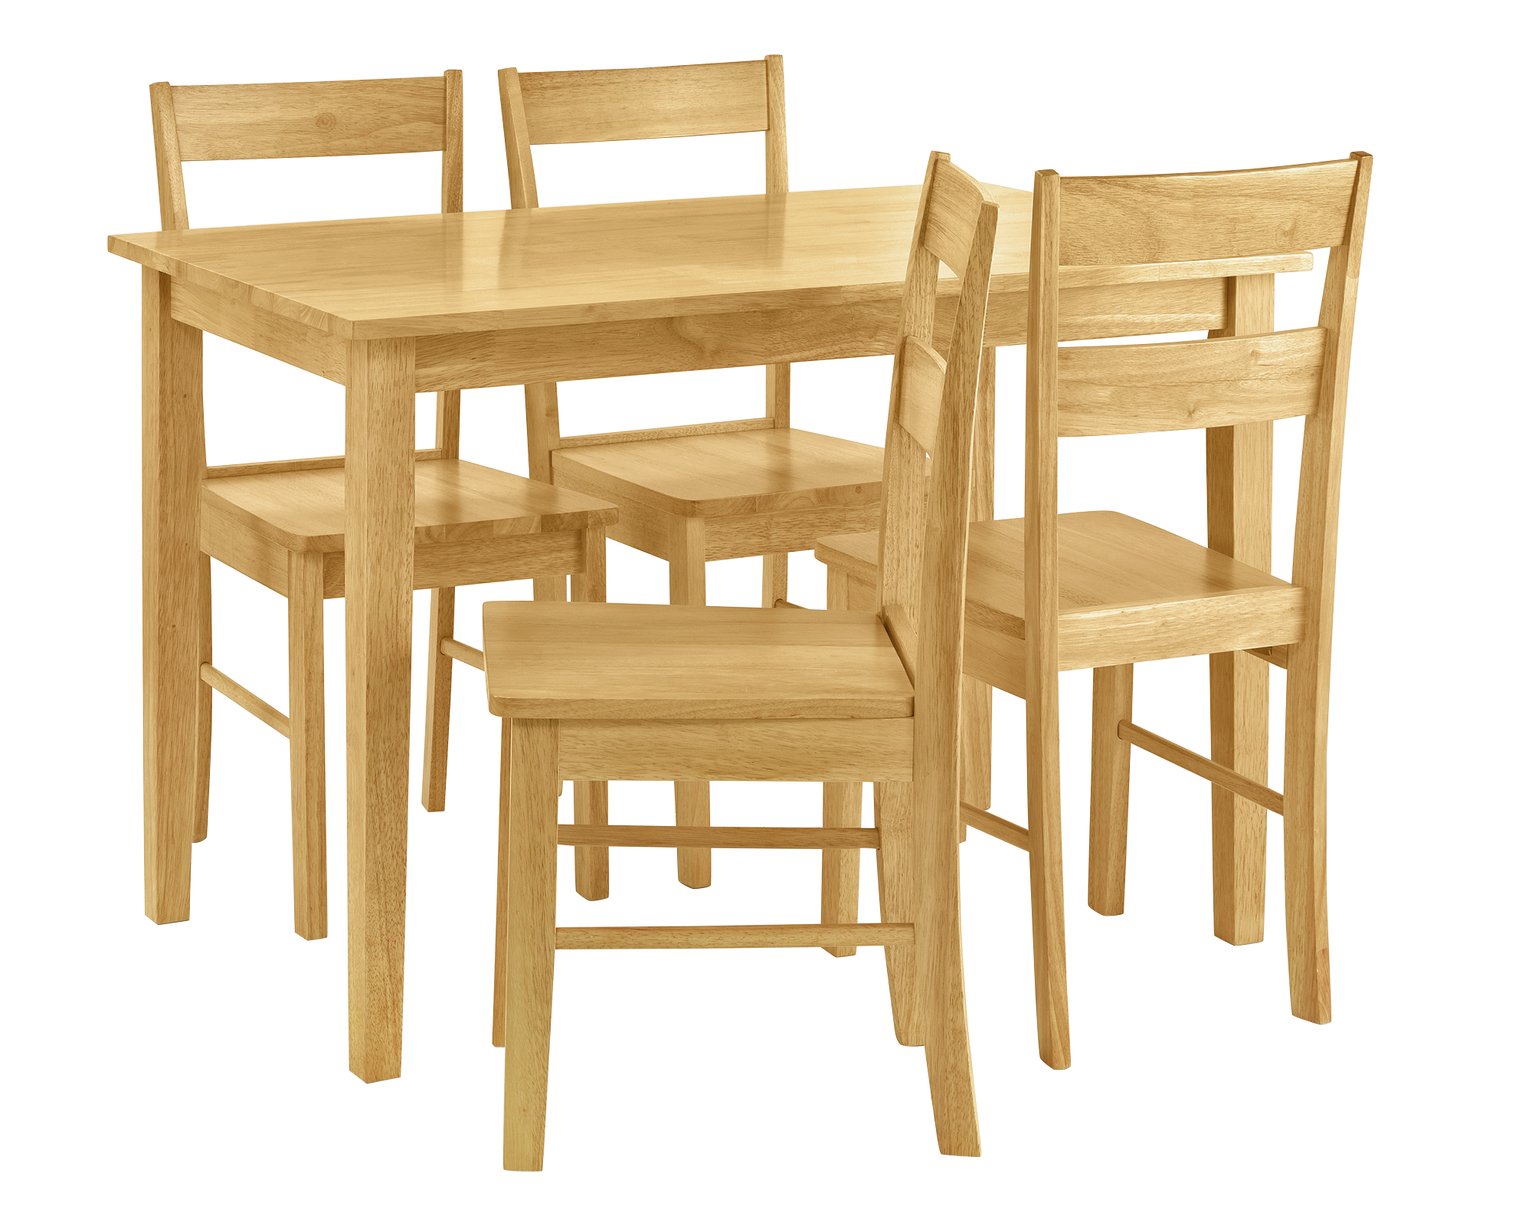 Argos Home Chicago Solid Wood Table & 4 Chairs - Natural